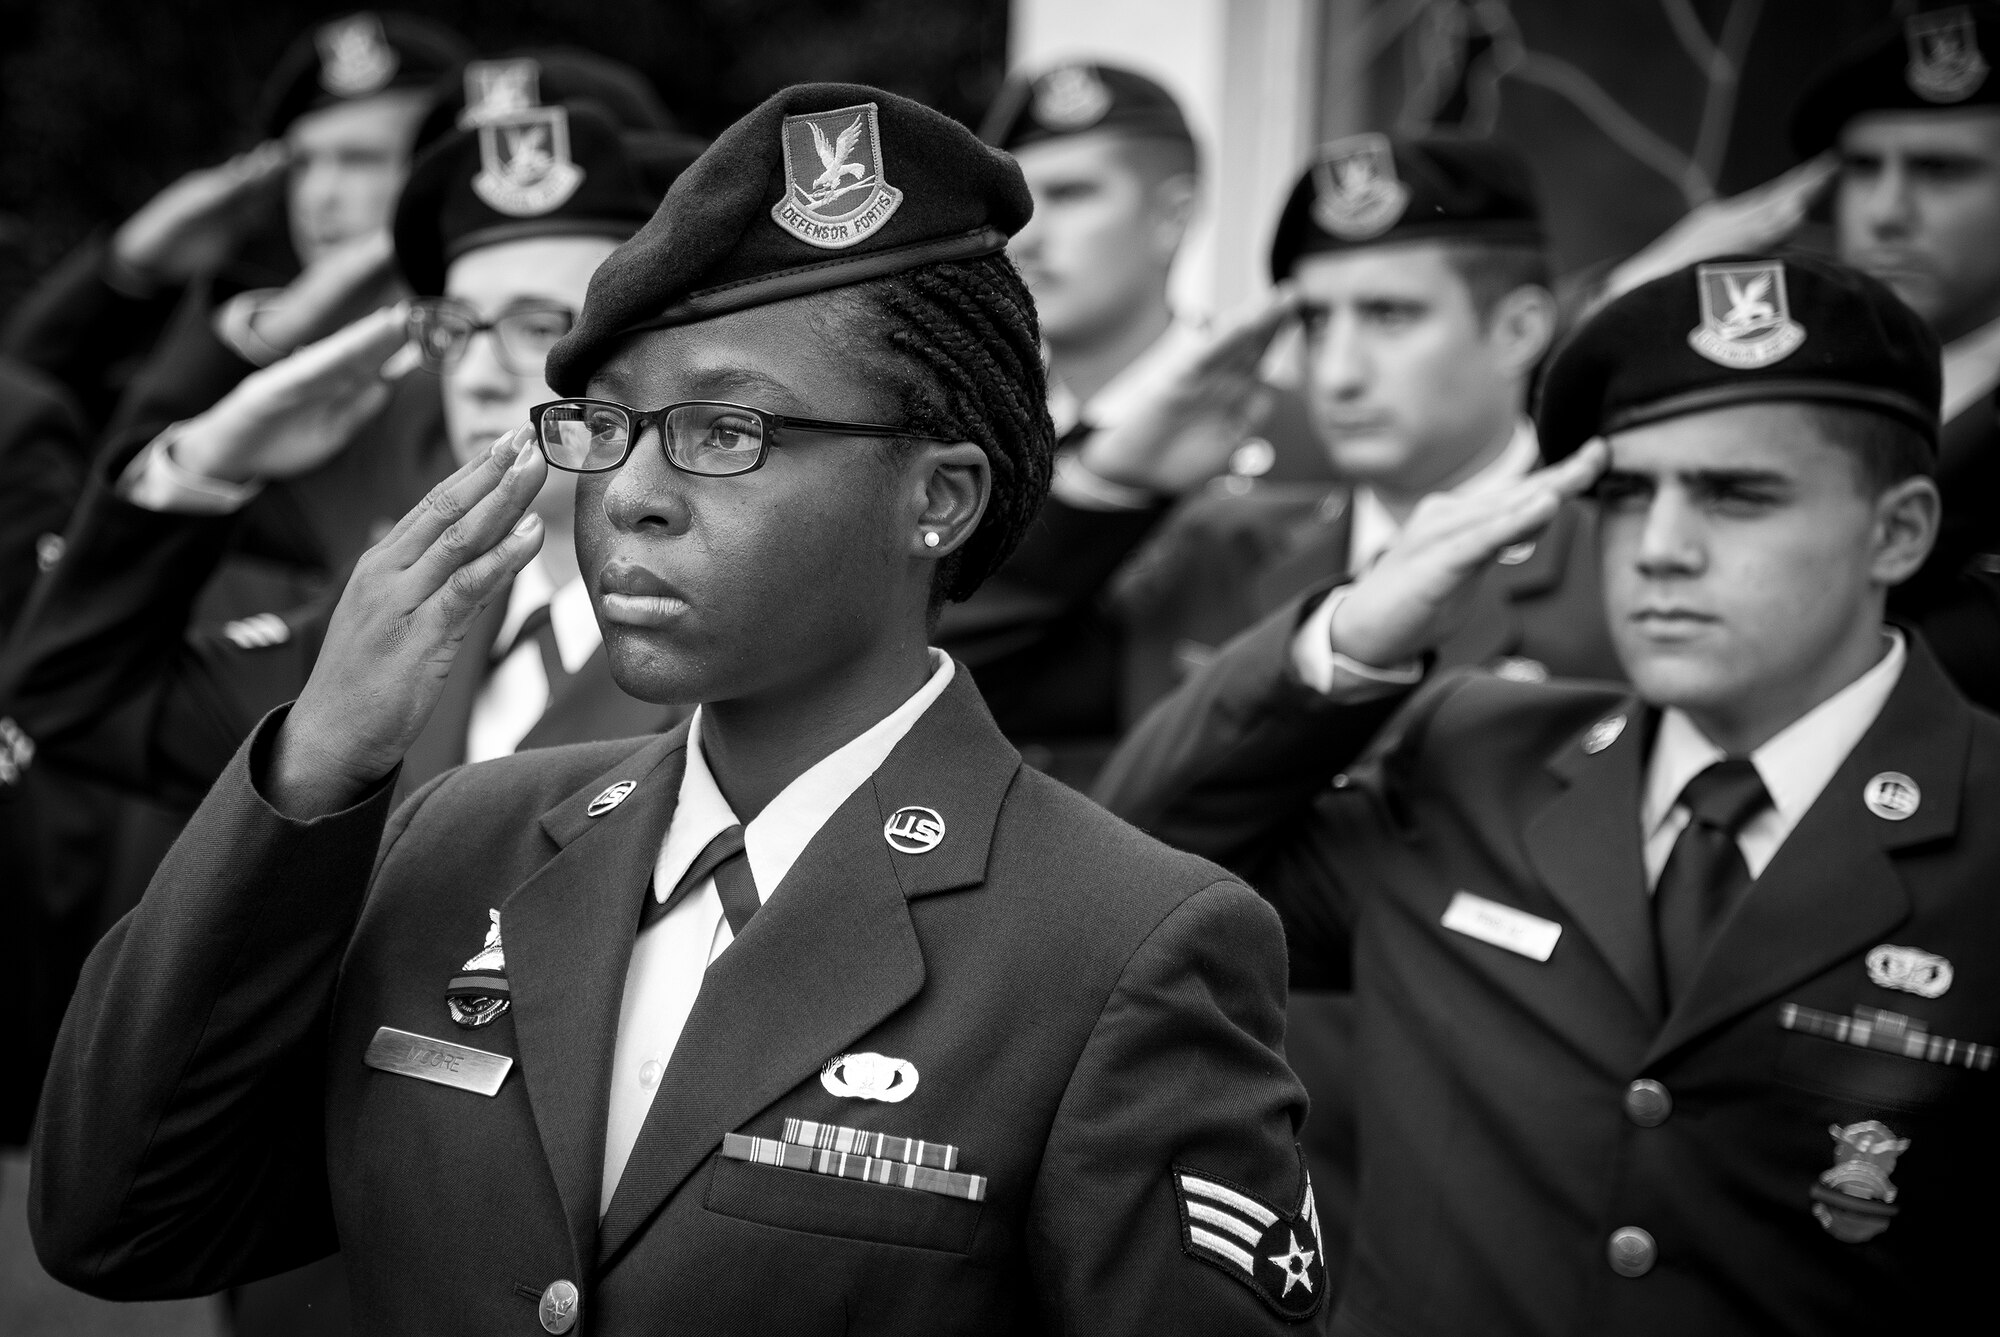 Senior Airman Delise Moore, 96th Security Forces Squadron, salutes with other Airmen in formation during the opening ceremony of Police Week at Eglin Air Force Base, Fla., May 15.  The ceremony was a gathering of security forces personnel for a formation and reveille ceremony performed at the All Wars Memorial.  Police Week activities will happen throughout the week and will close with security forces Airmen performing a retreat ceremony at Bldg. 1.  (U.S. Air Force photo/Samuel King Jr.)